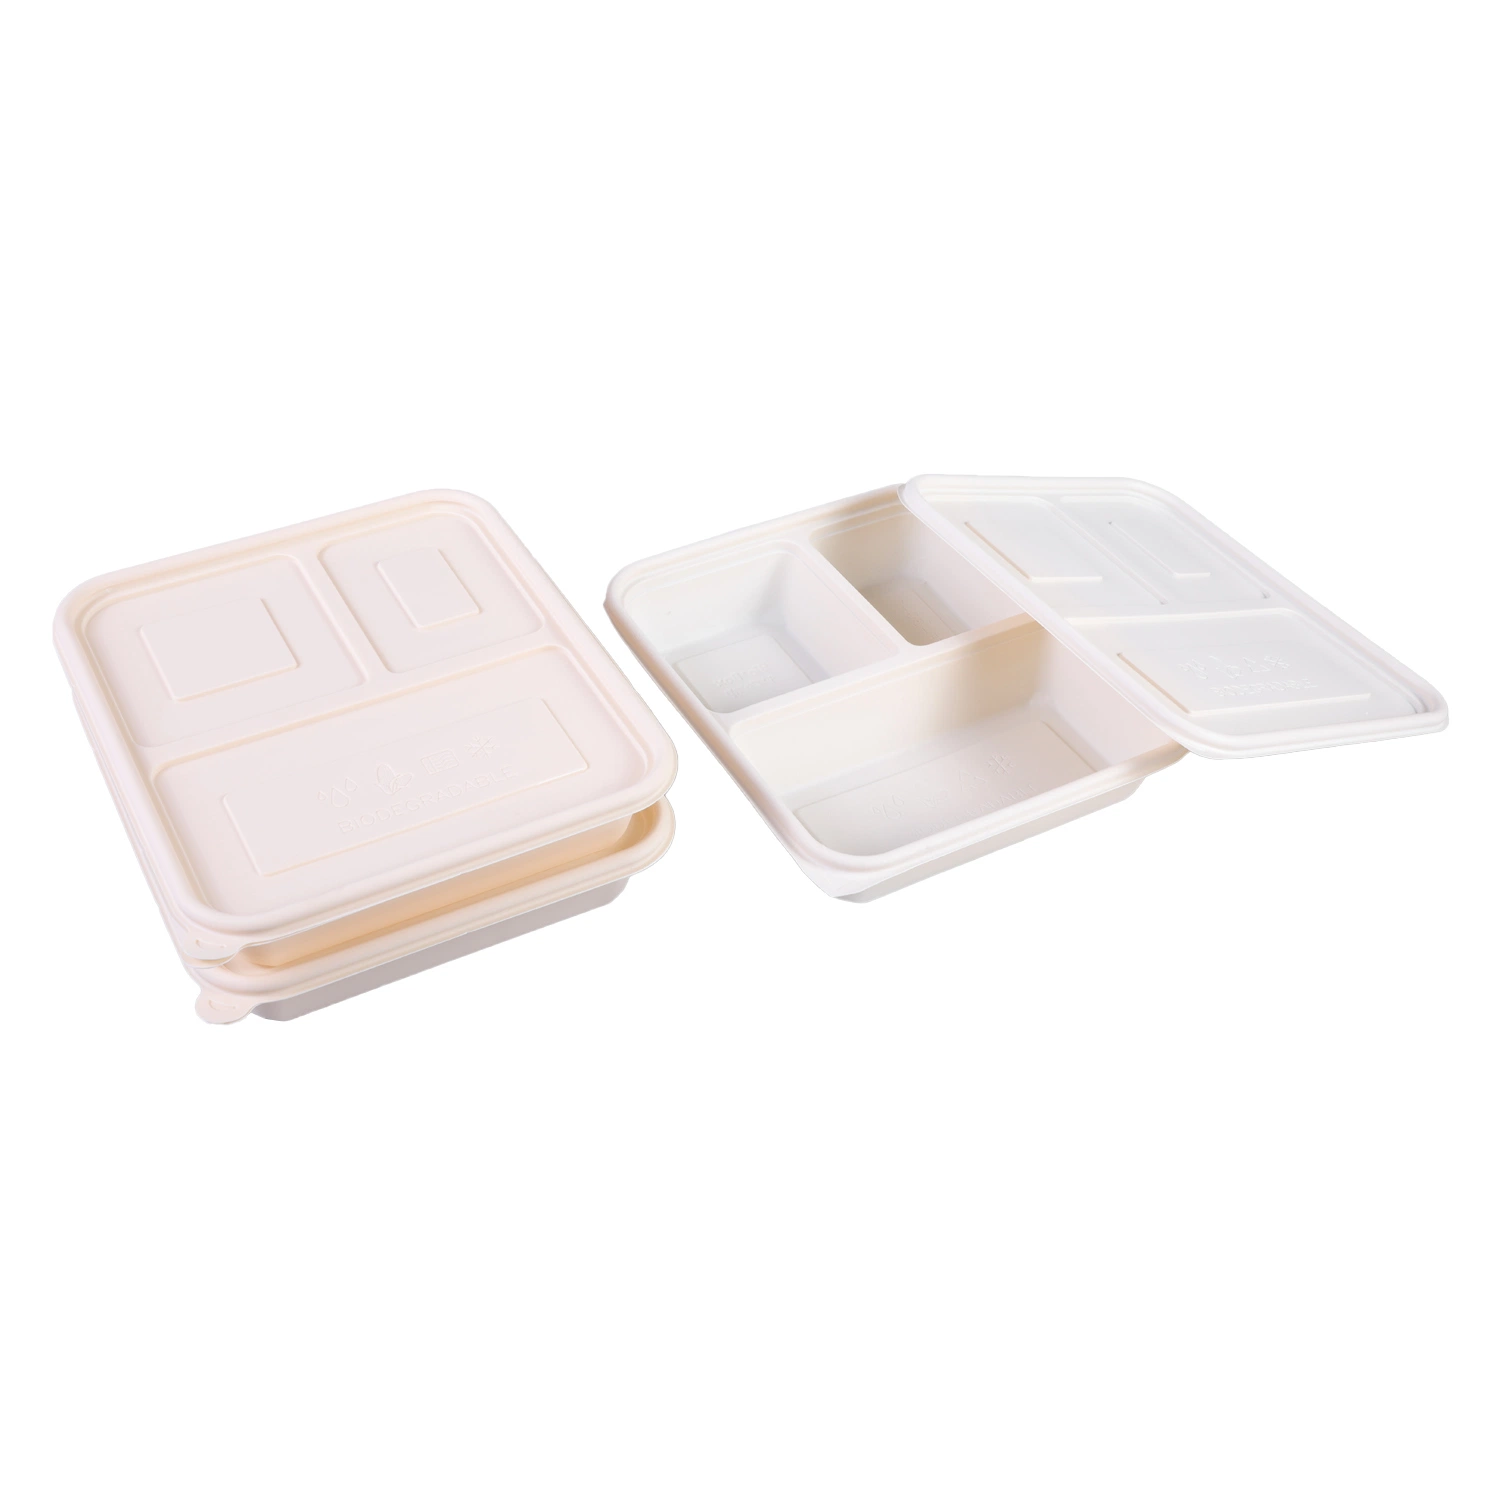 Biodegradable Corn Starch Meal Food Container Lunch-Box for 3/4/5 Compartment